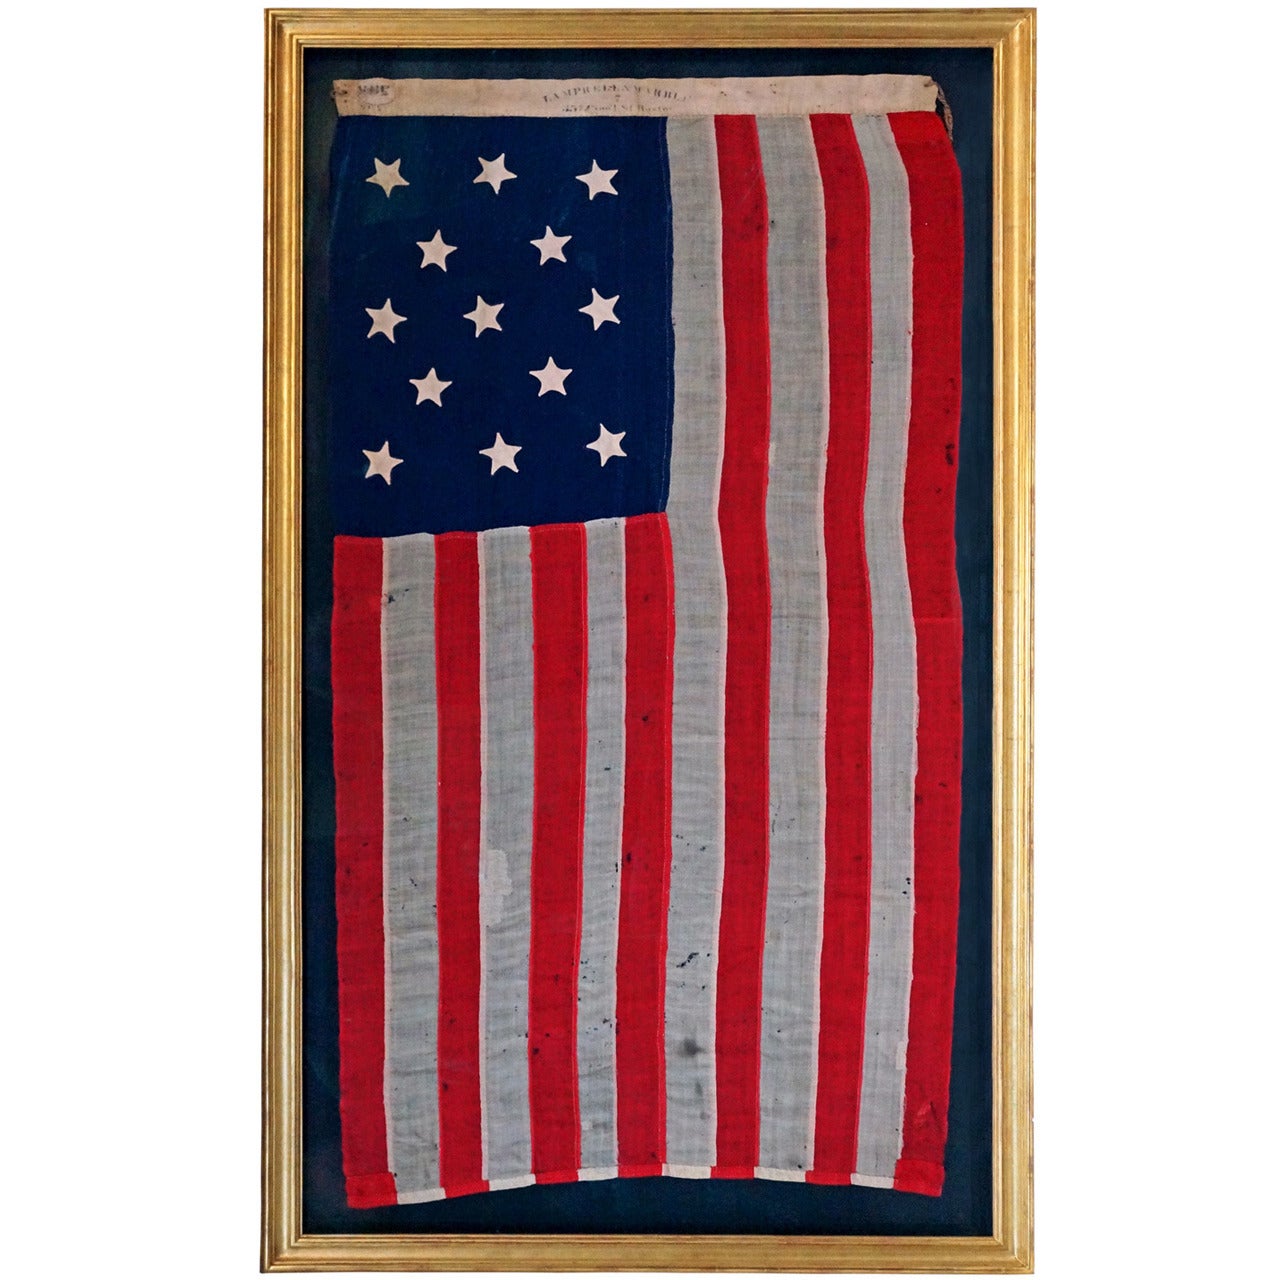 Lamprell & Marble 13-Star American Flag For Sale